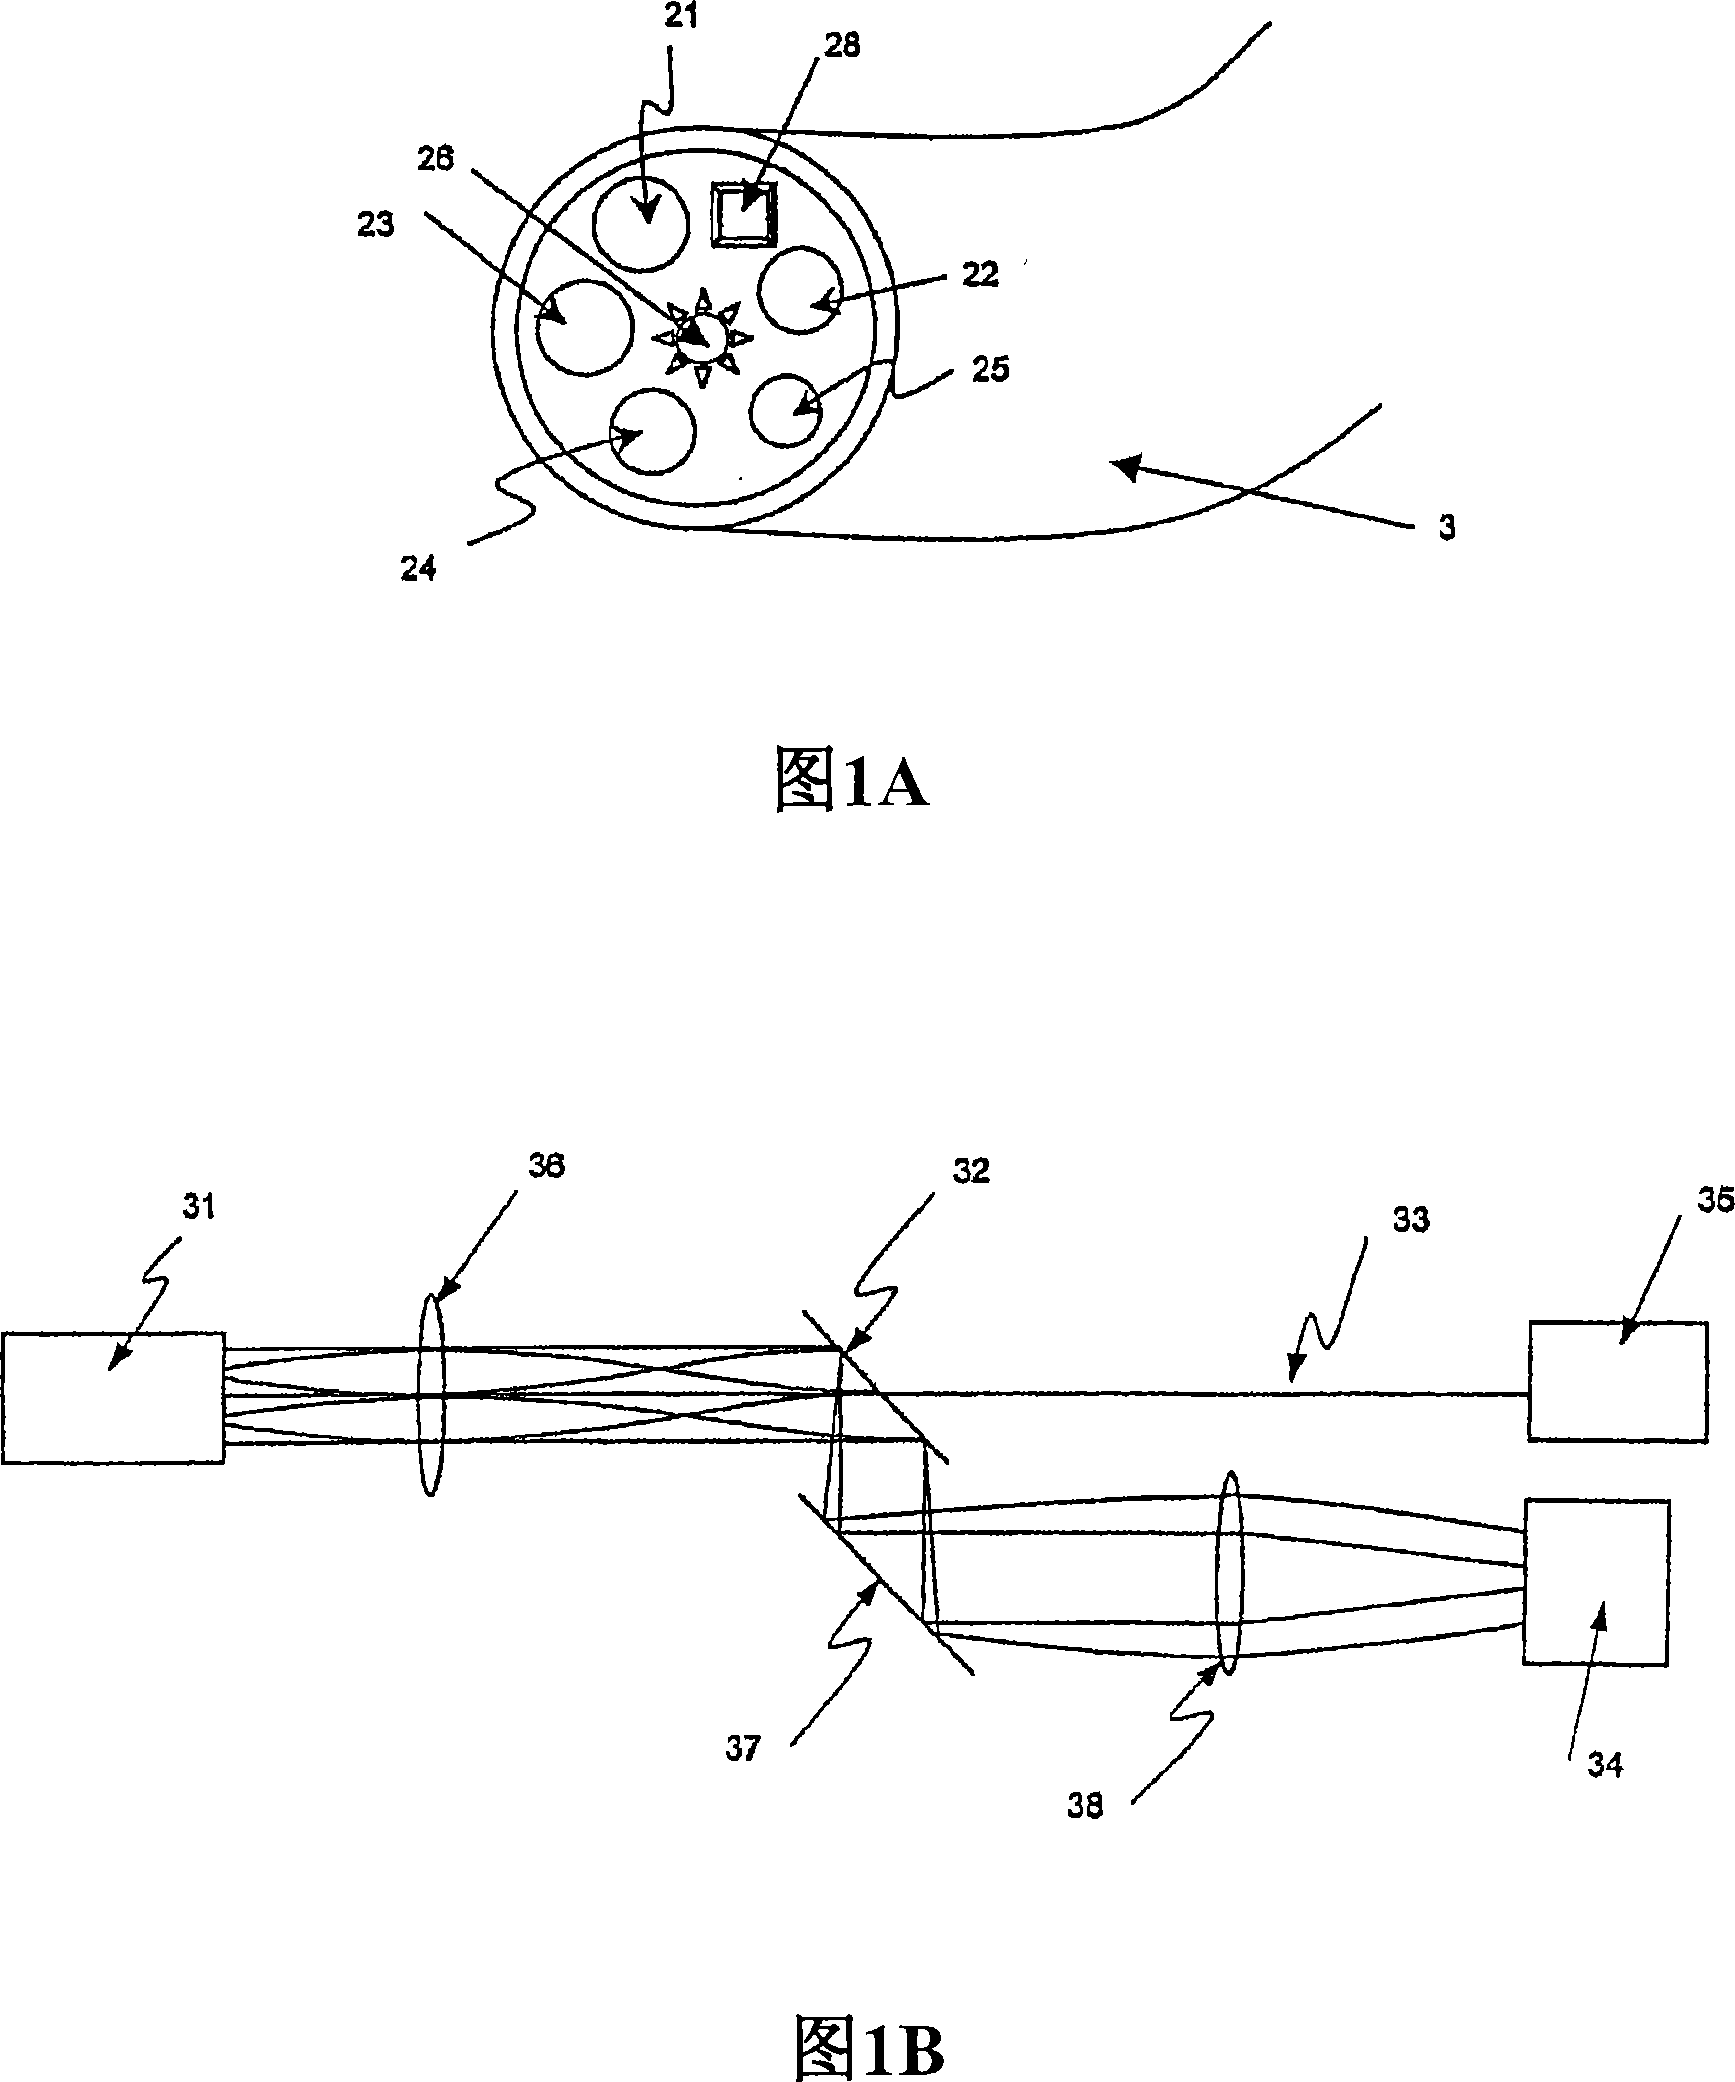 Method and apparatus for measuring cancerous changes from reflectance spectral measurements obtained during endoscopic imaging